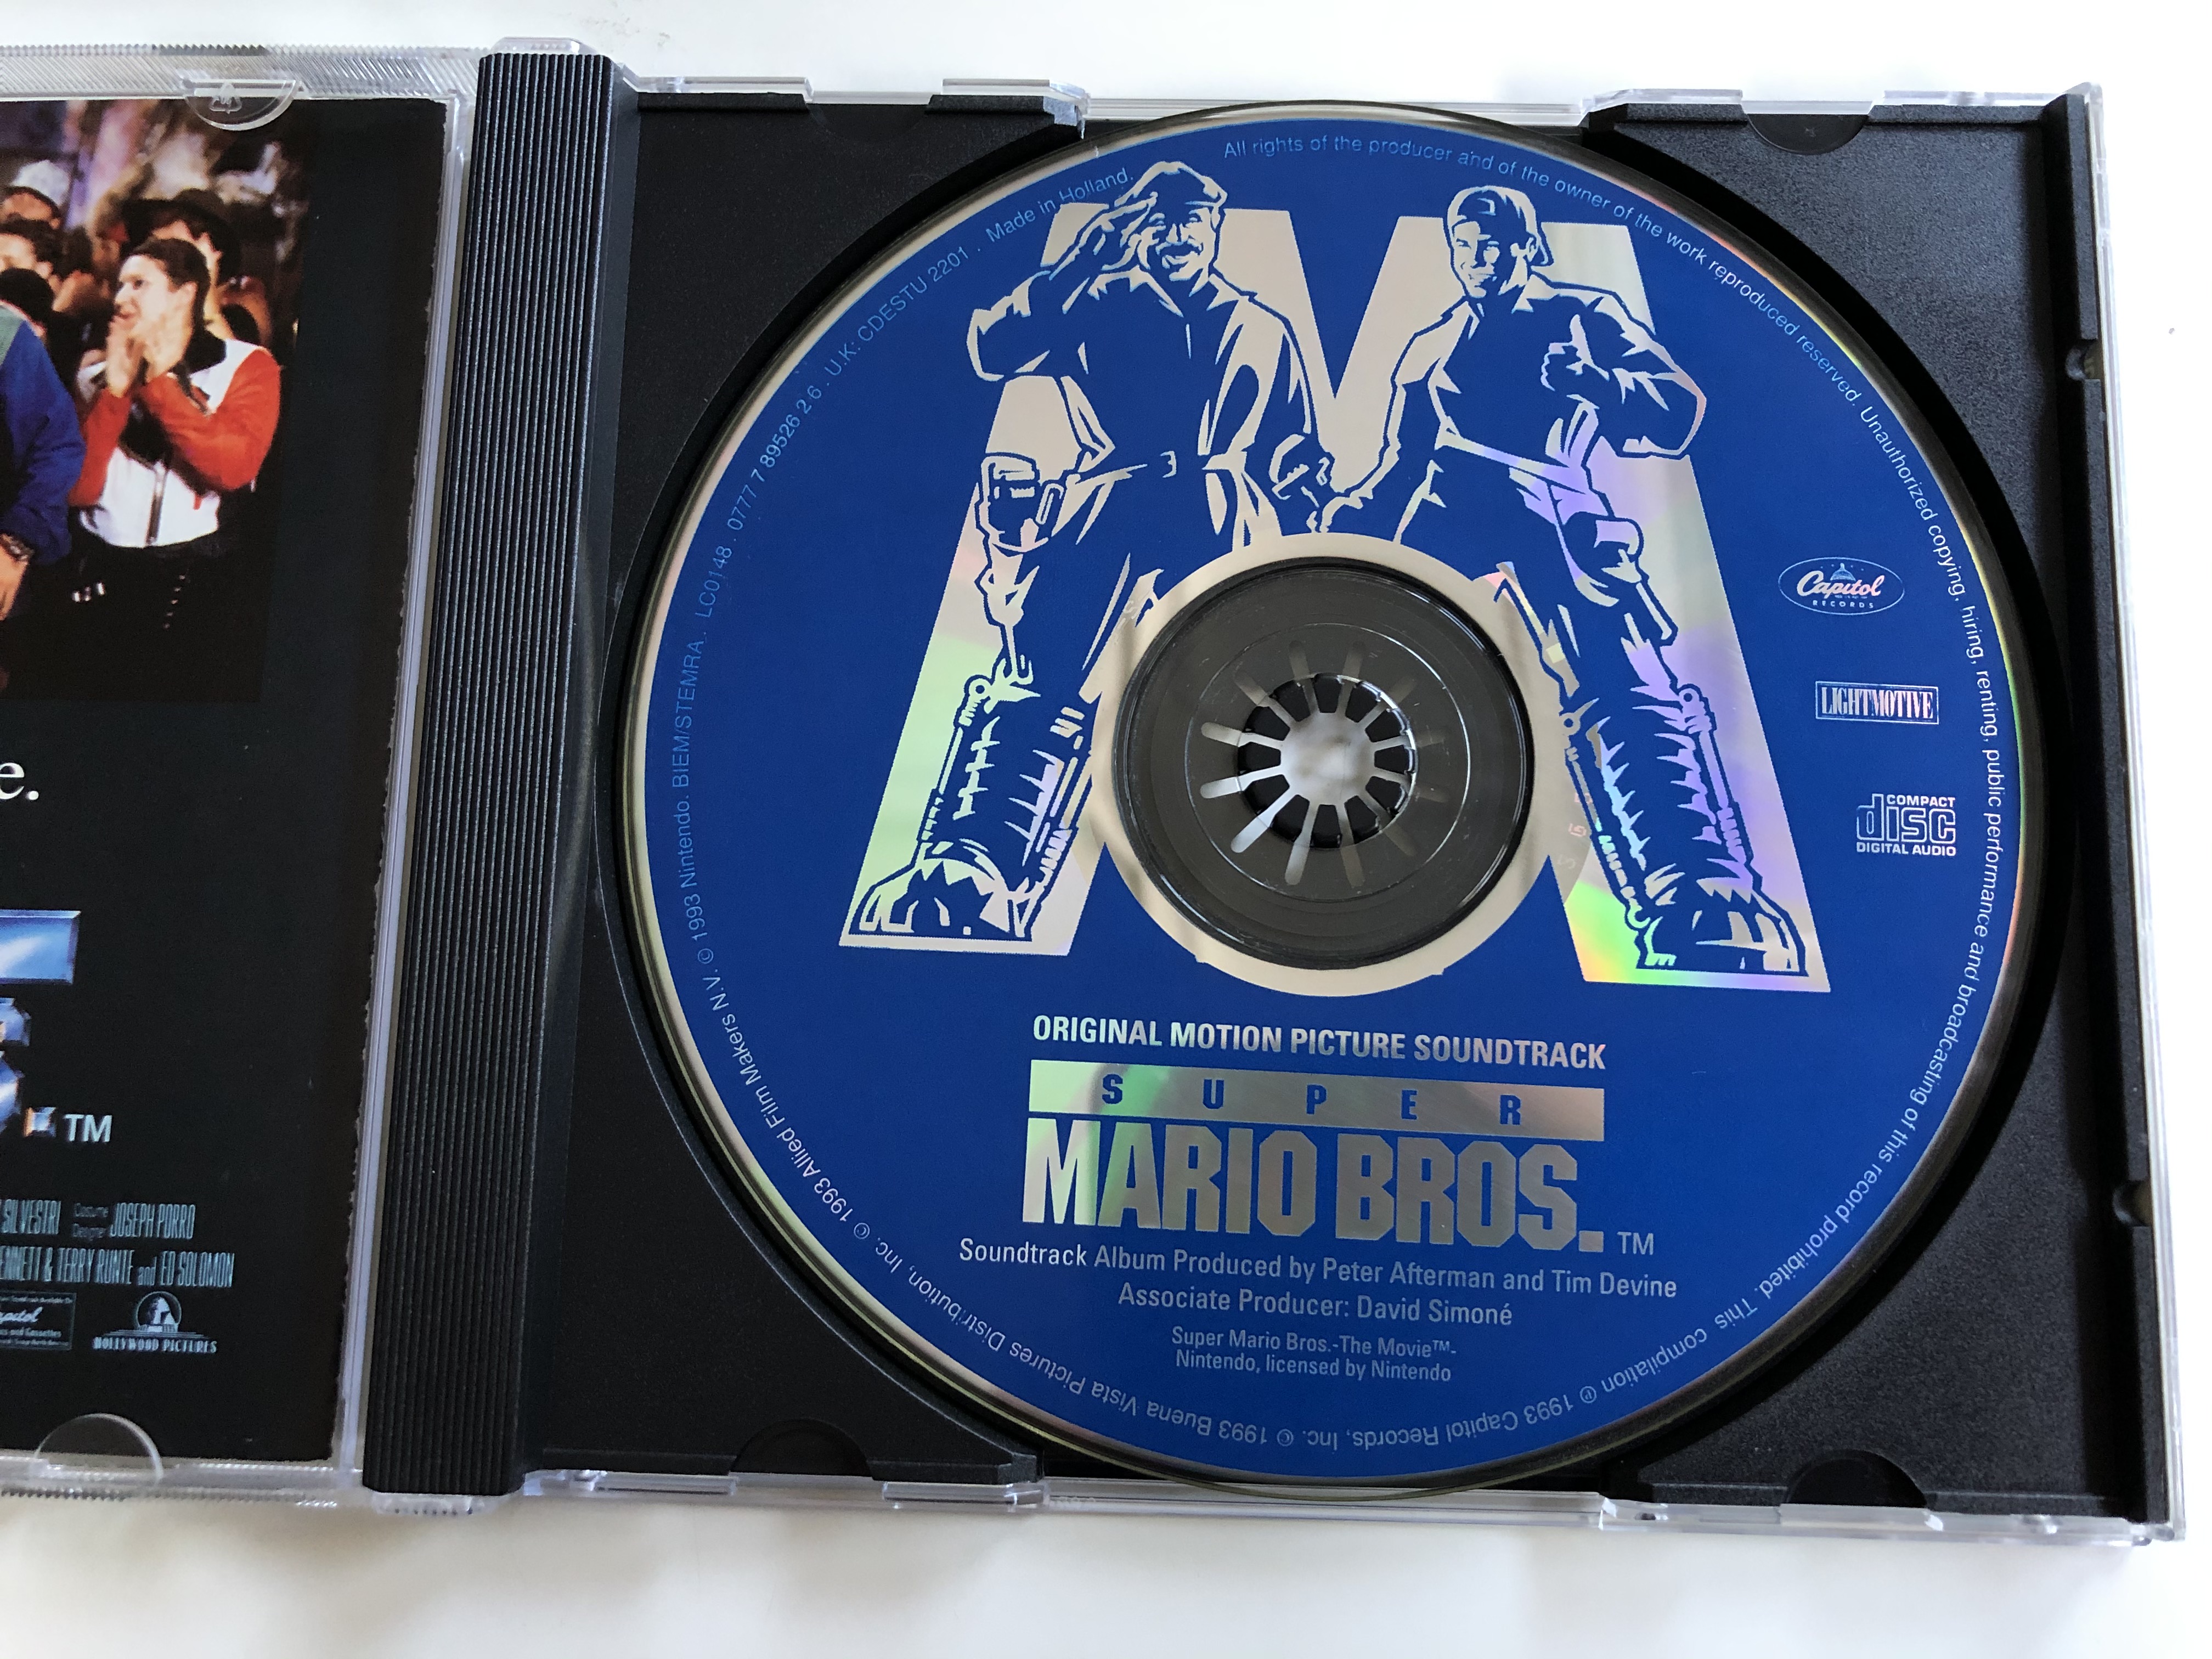 original-motion-picture-soundtrack-super-mario-bros.-featuring-music-from-roxette-extreme-divinlyls-megadeth-george-clinton-joe-satriani-queen-charles-eddie-marky-mark-us3-tracie-3-.jpg